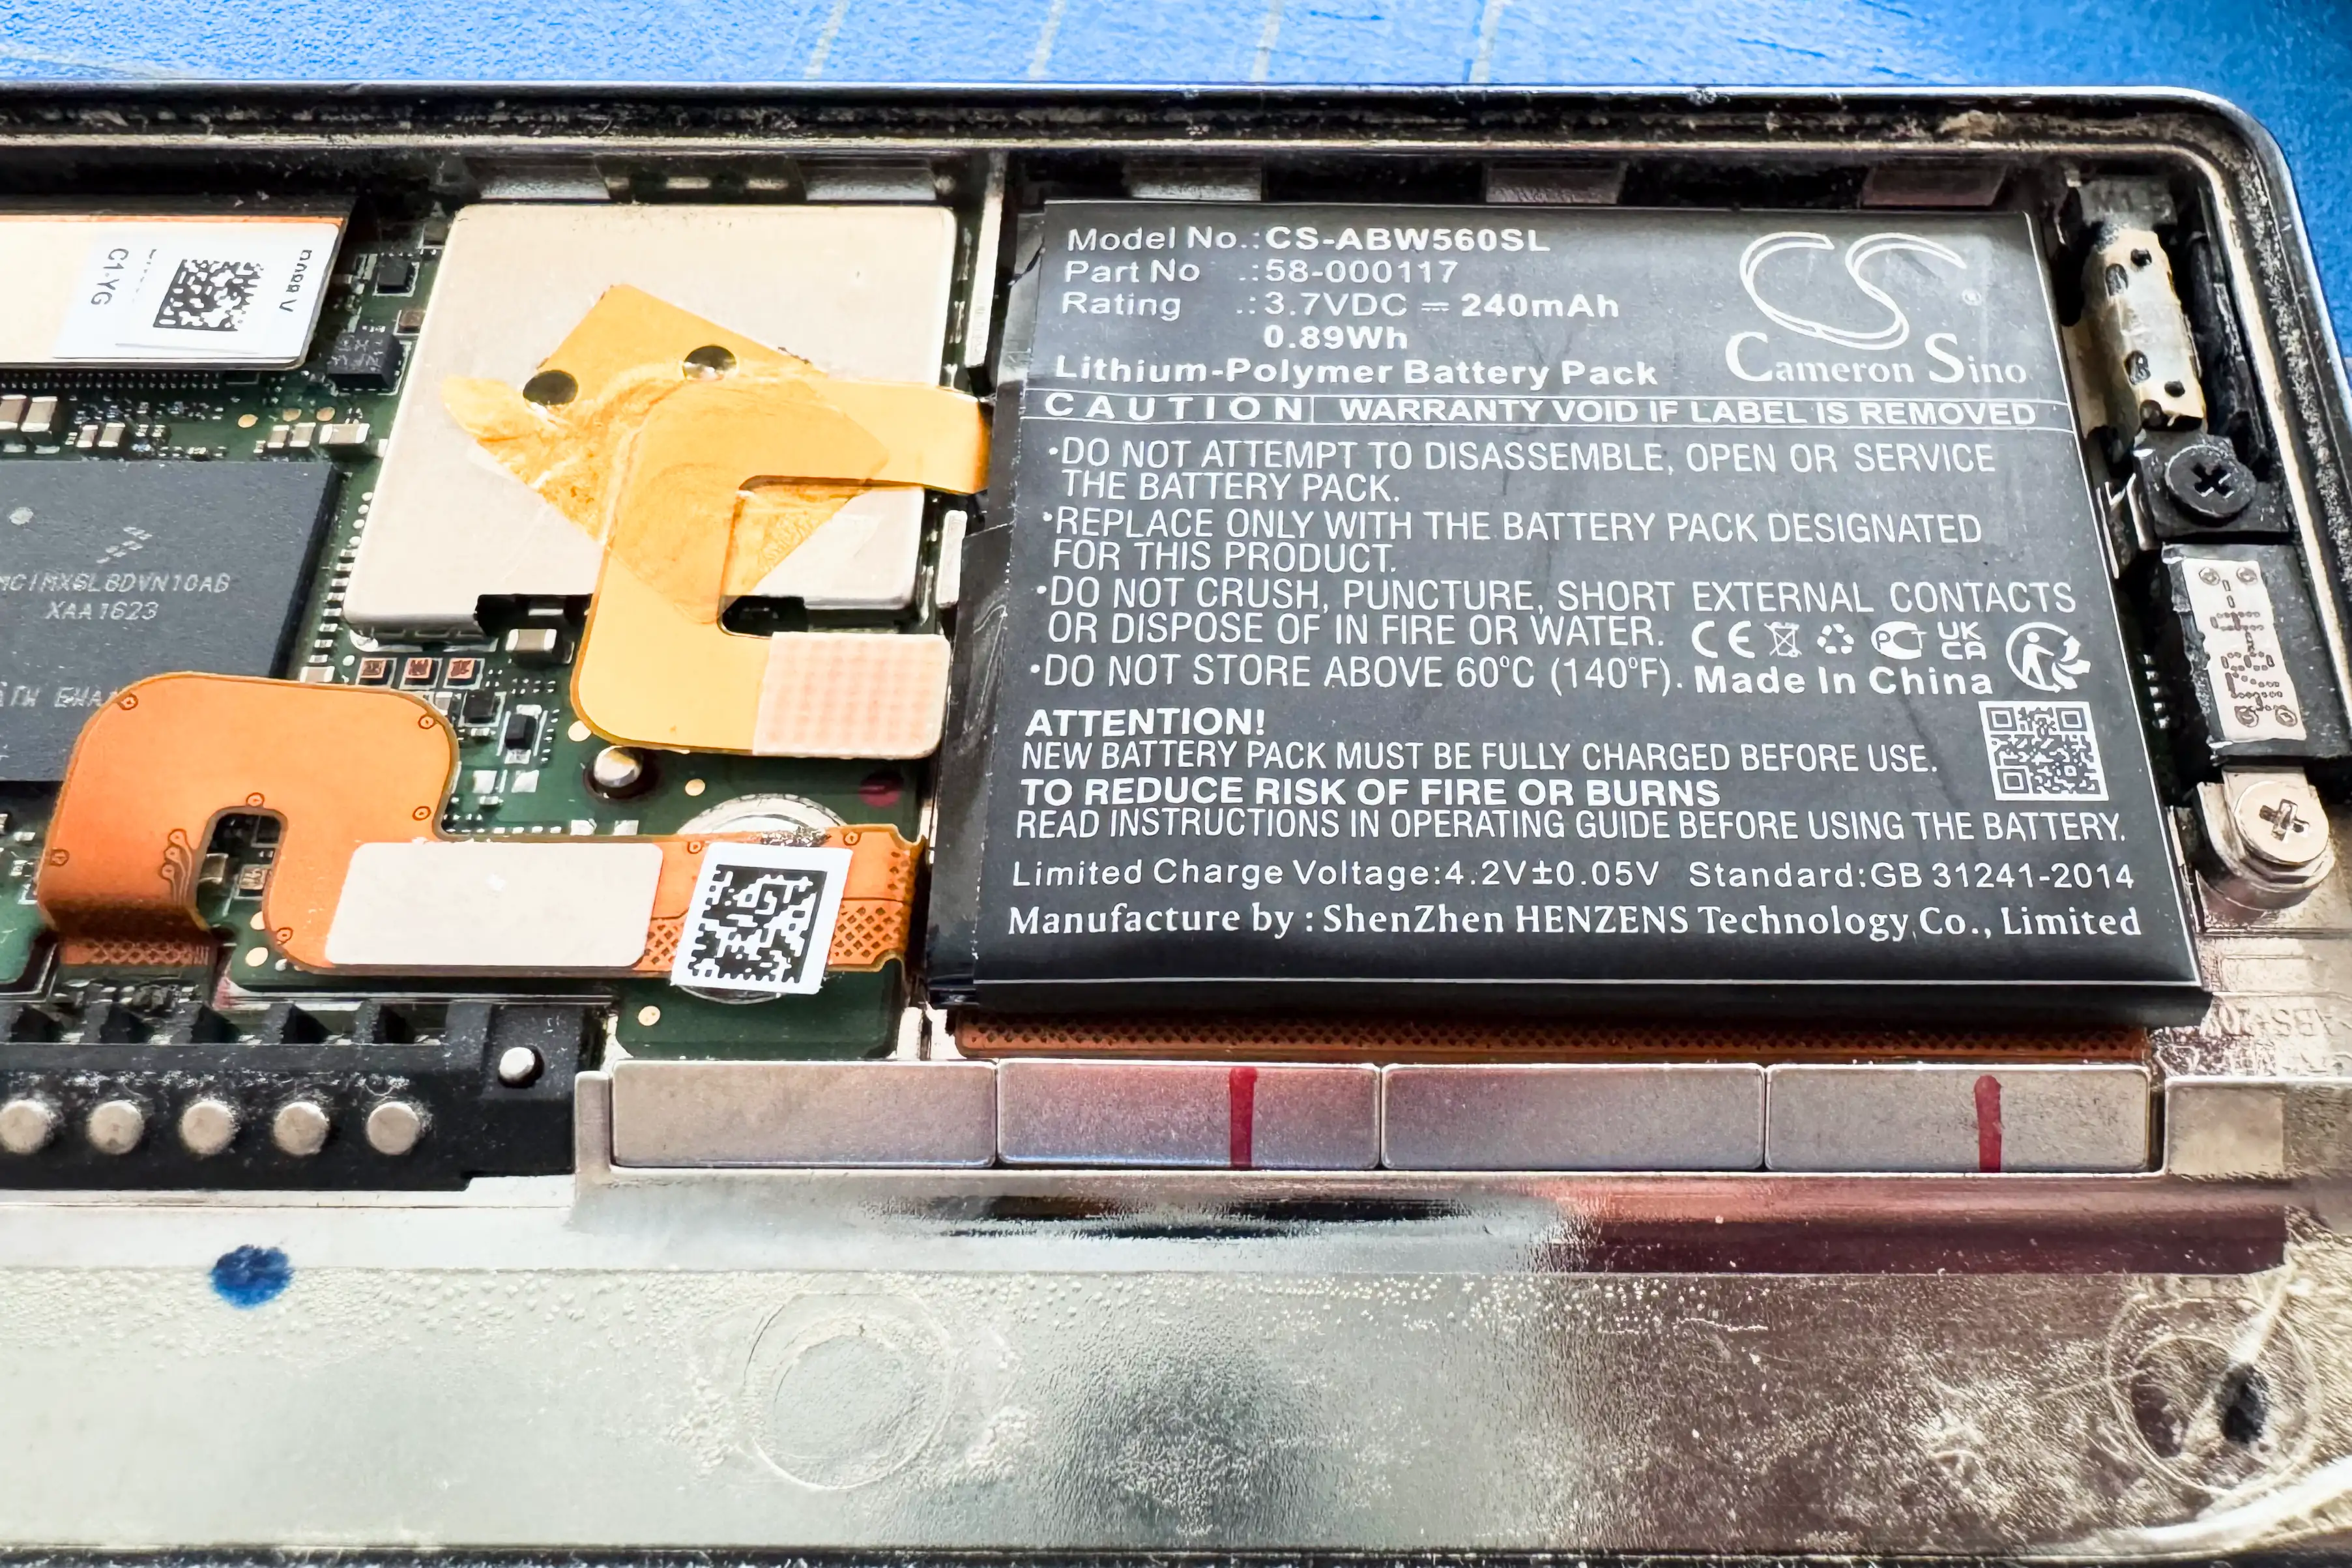 New battery installed and connected